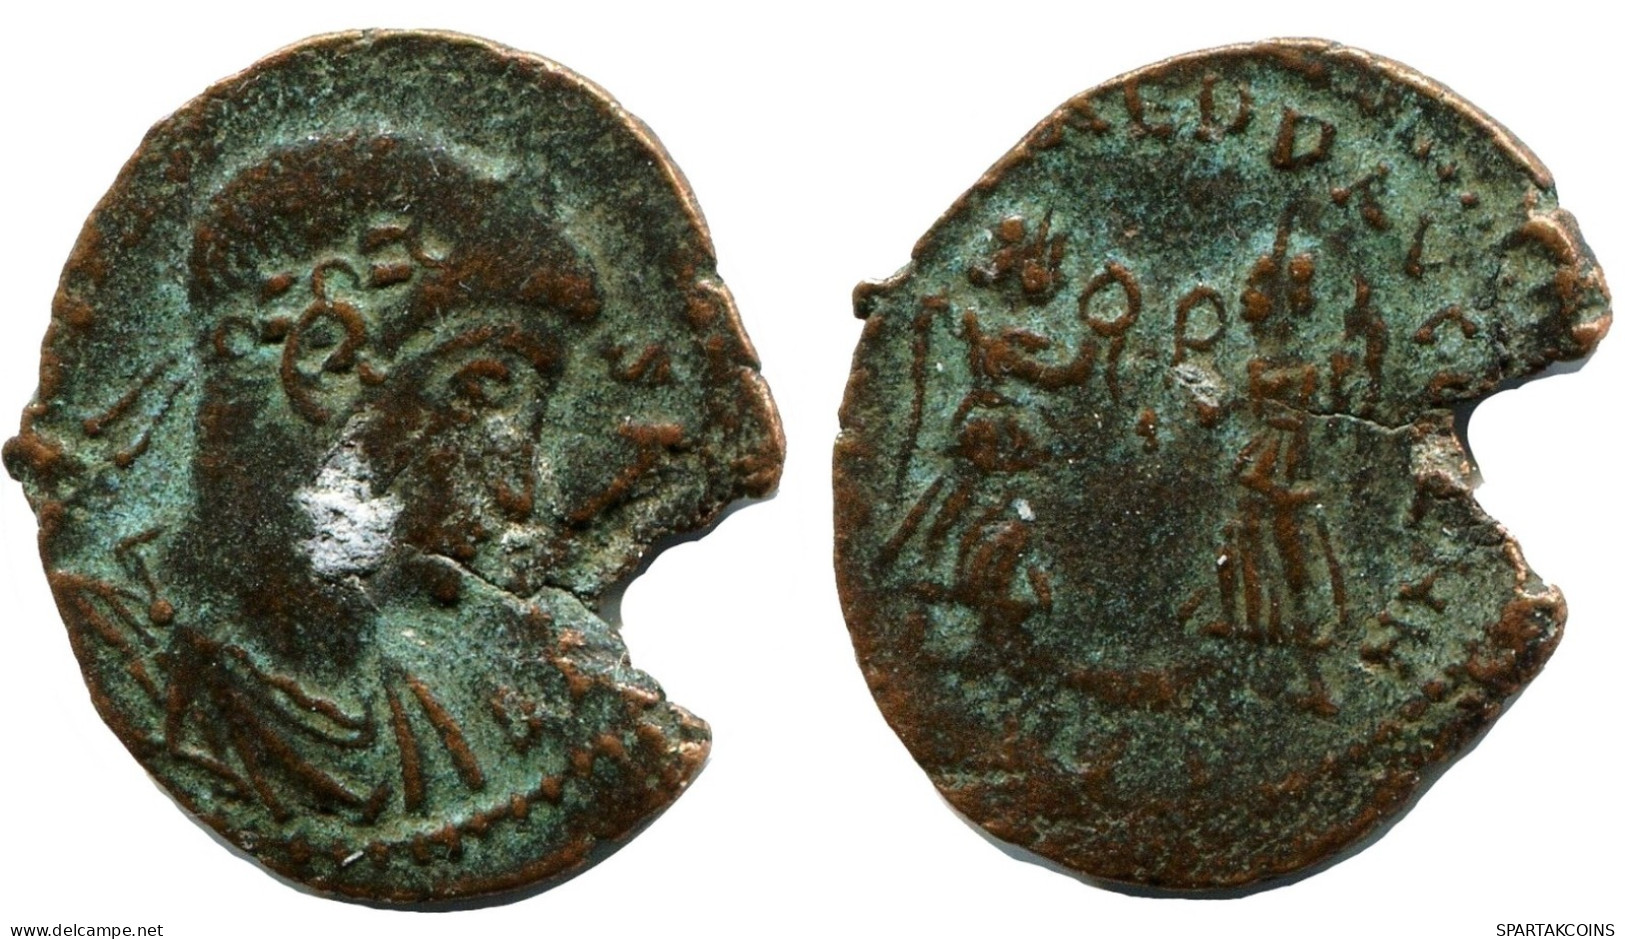 CONSTANS MINTED IN ROME ITALY FROM THE ROYAL ONTARIO MUSEUM #ANC11494.14.U.A - The Christian Empire (307 AD Tot 363 AD)